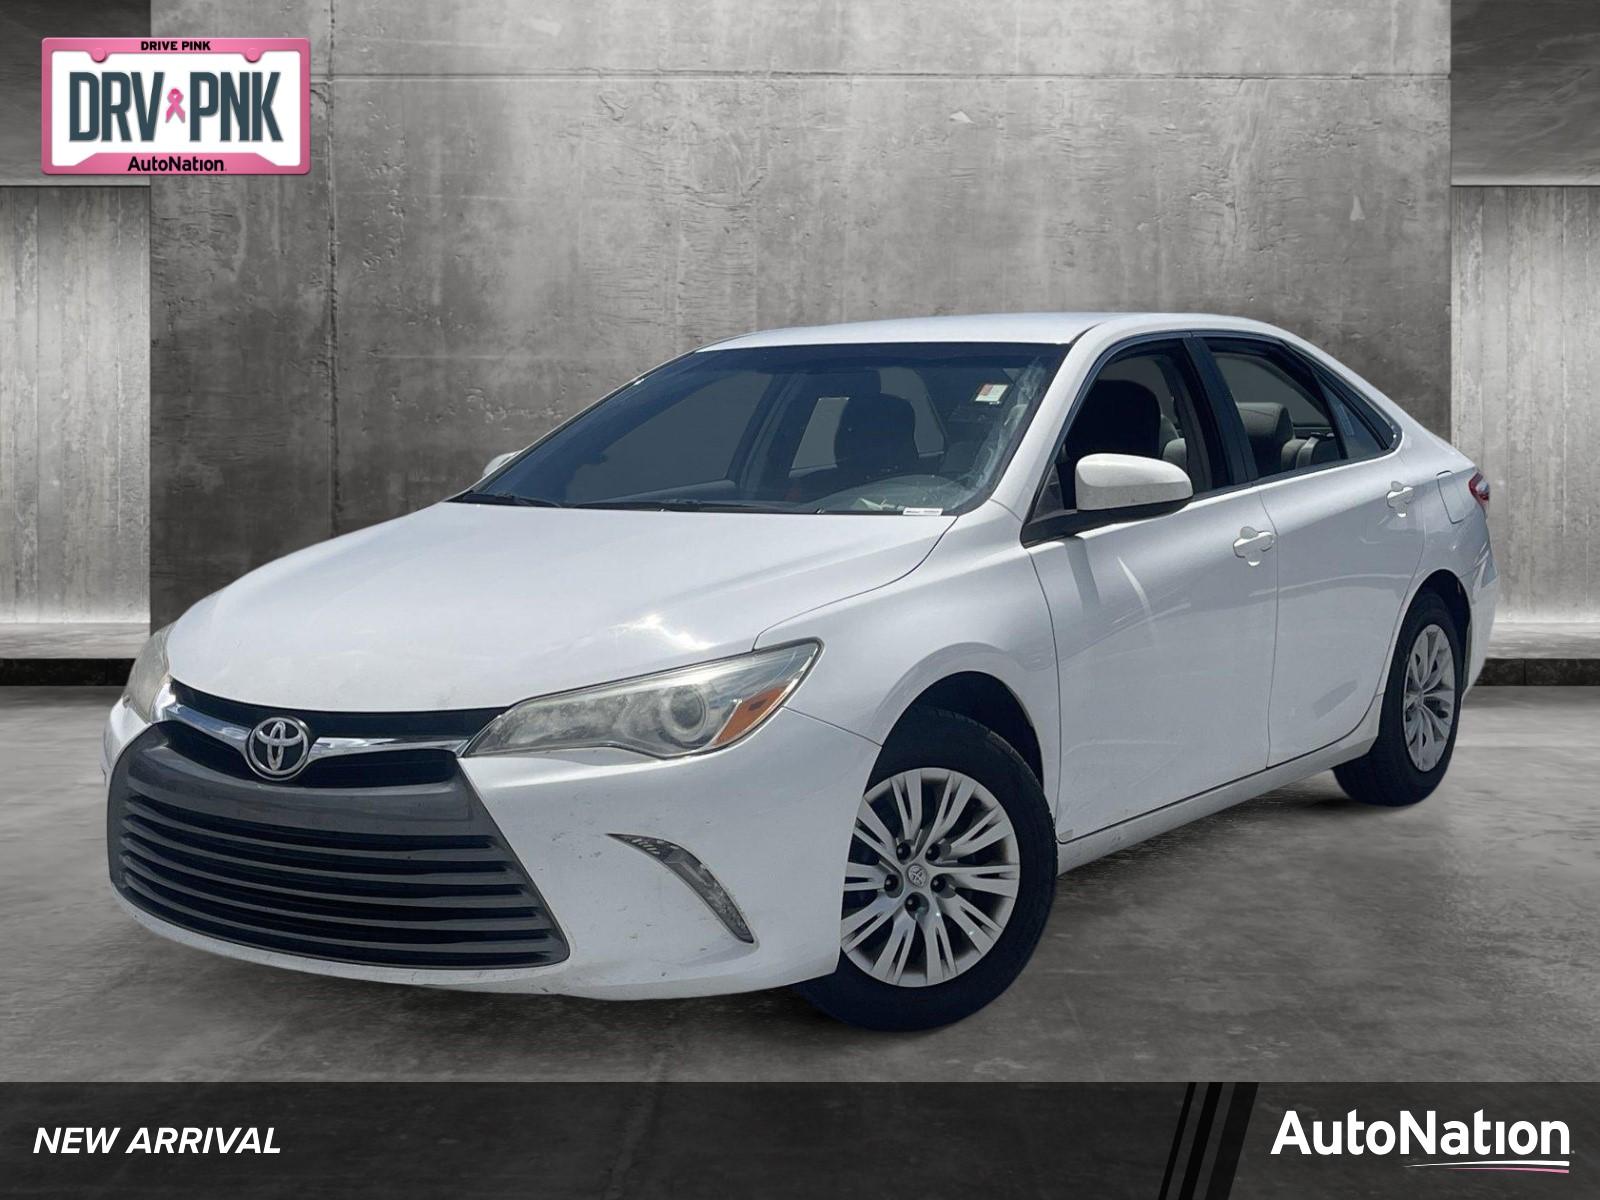 2017 Toyota Camry Vehicle Photo in Ft. Myers, FL 33907